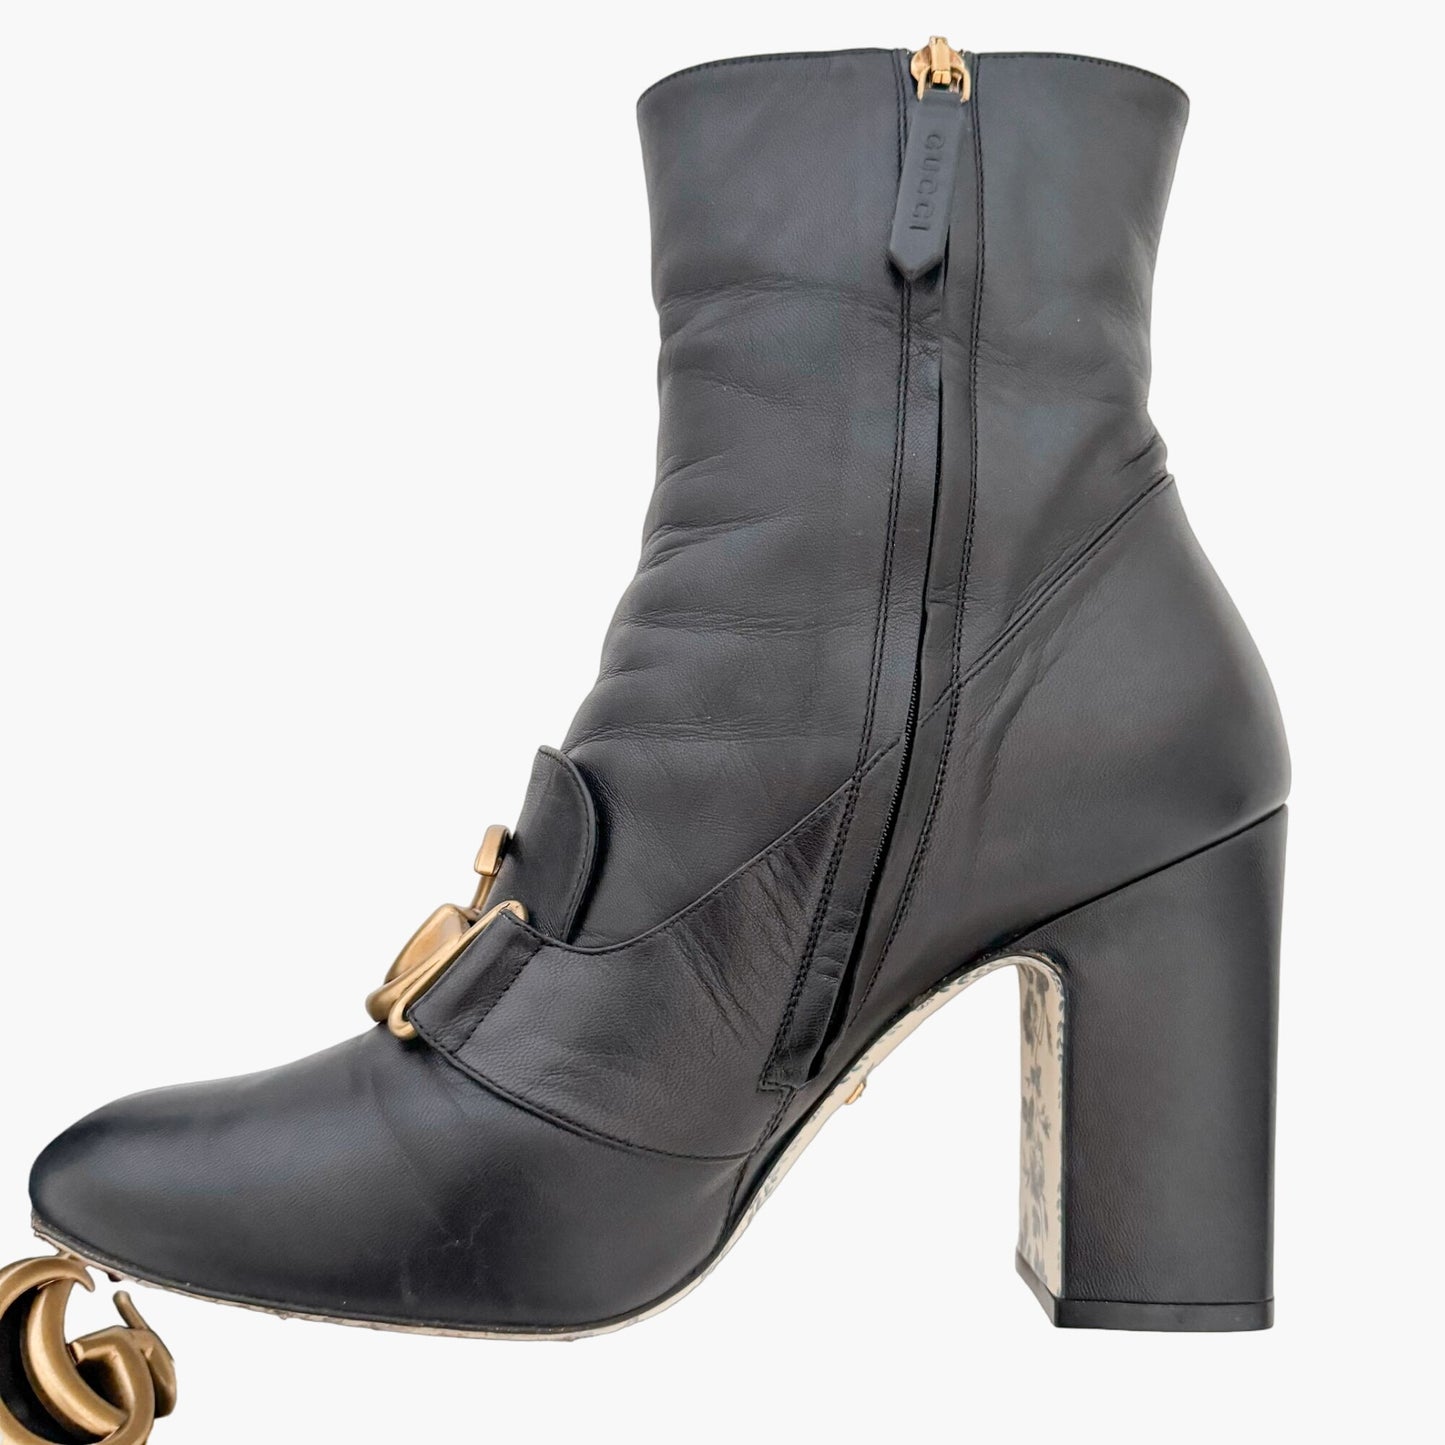 Gucci Victoire Ankle Boots in Black Leather Size 39